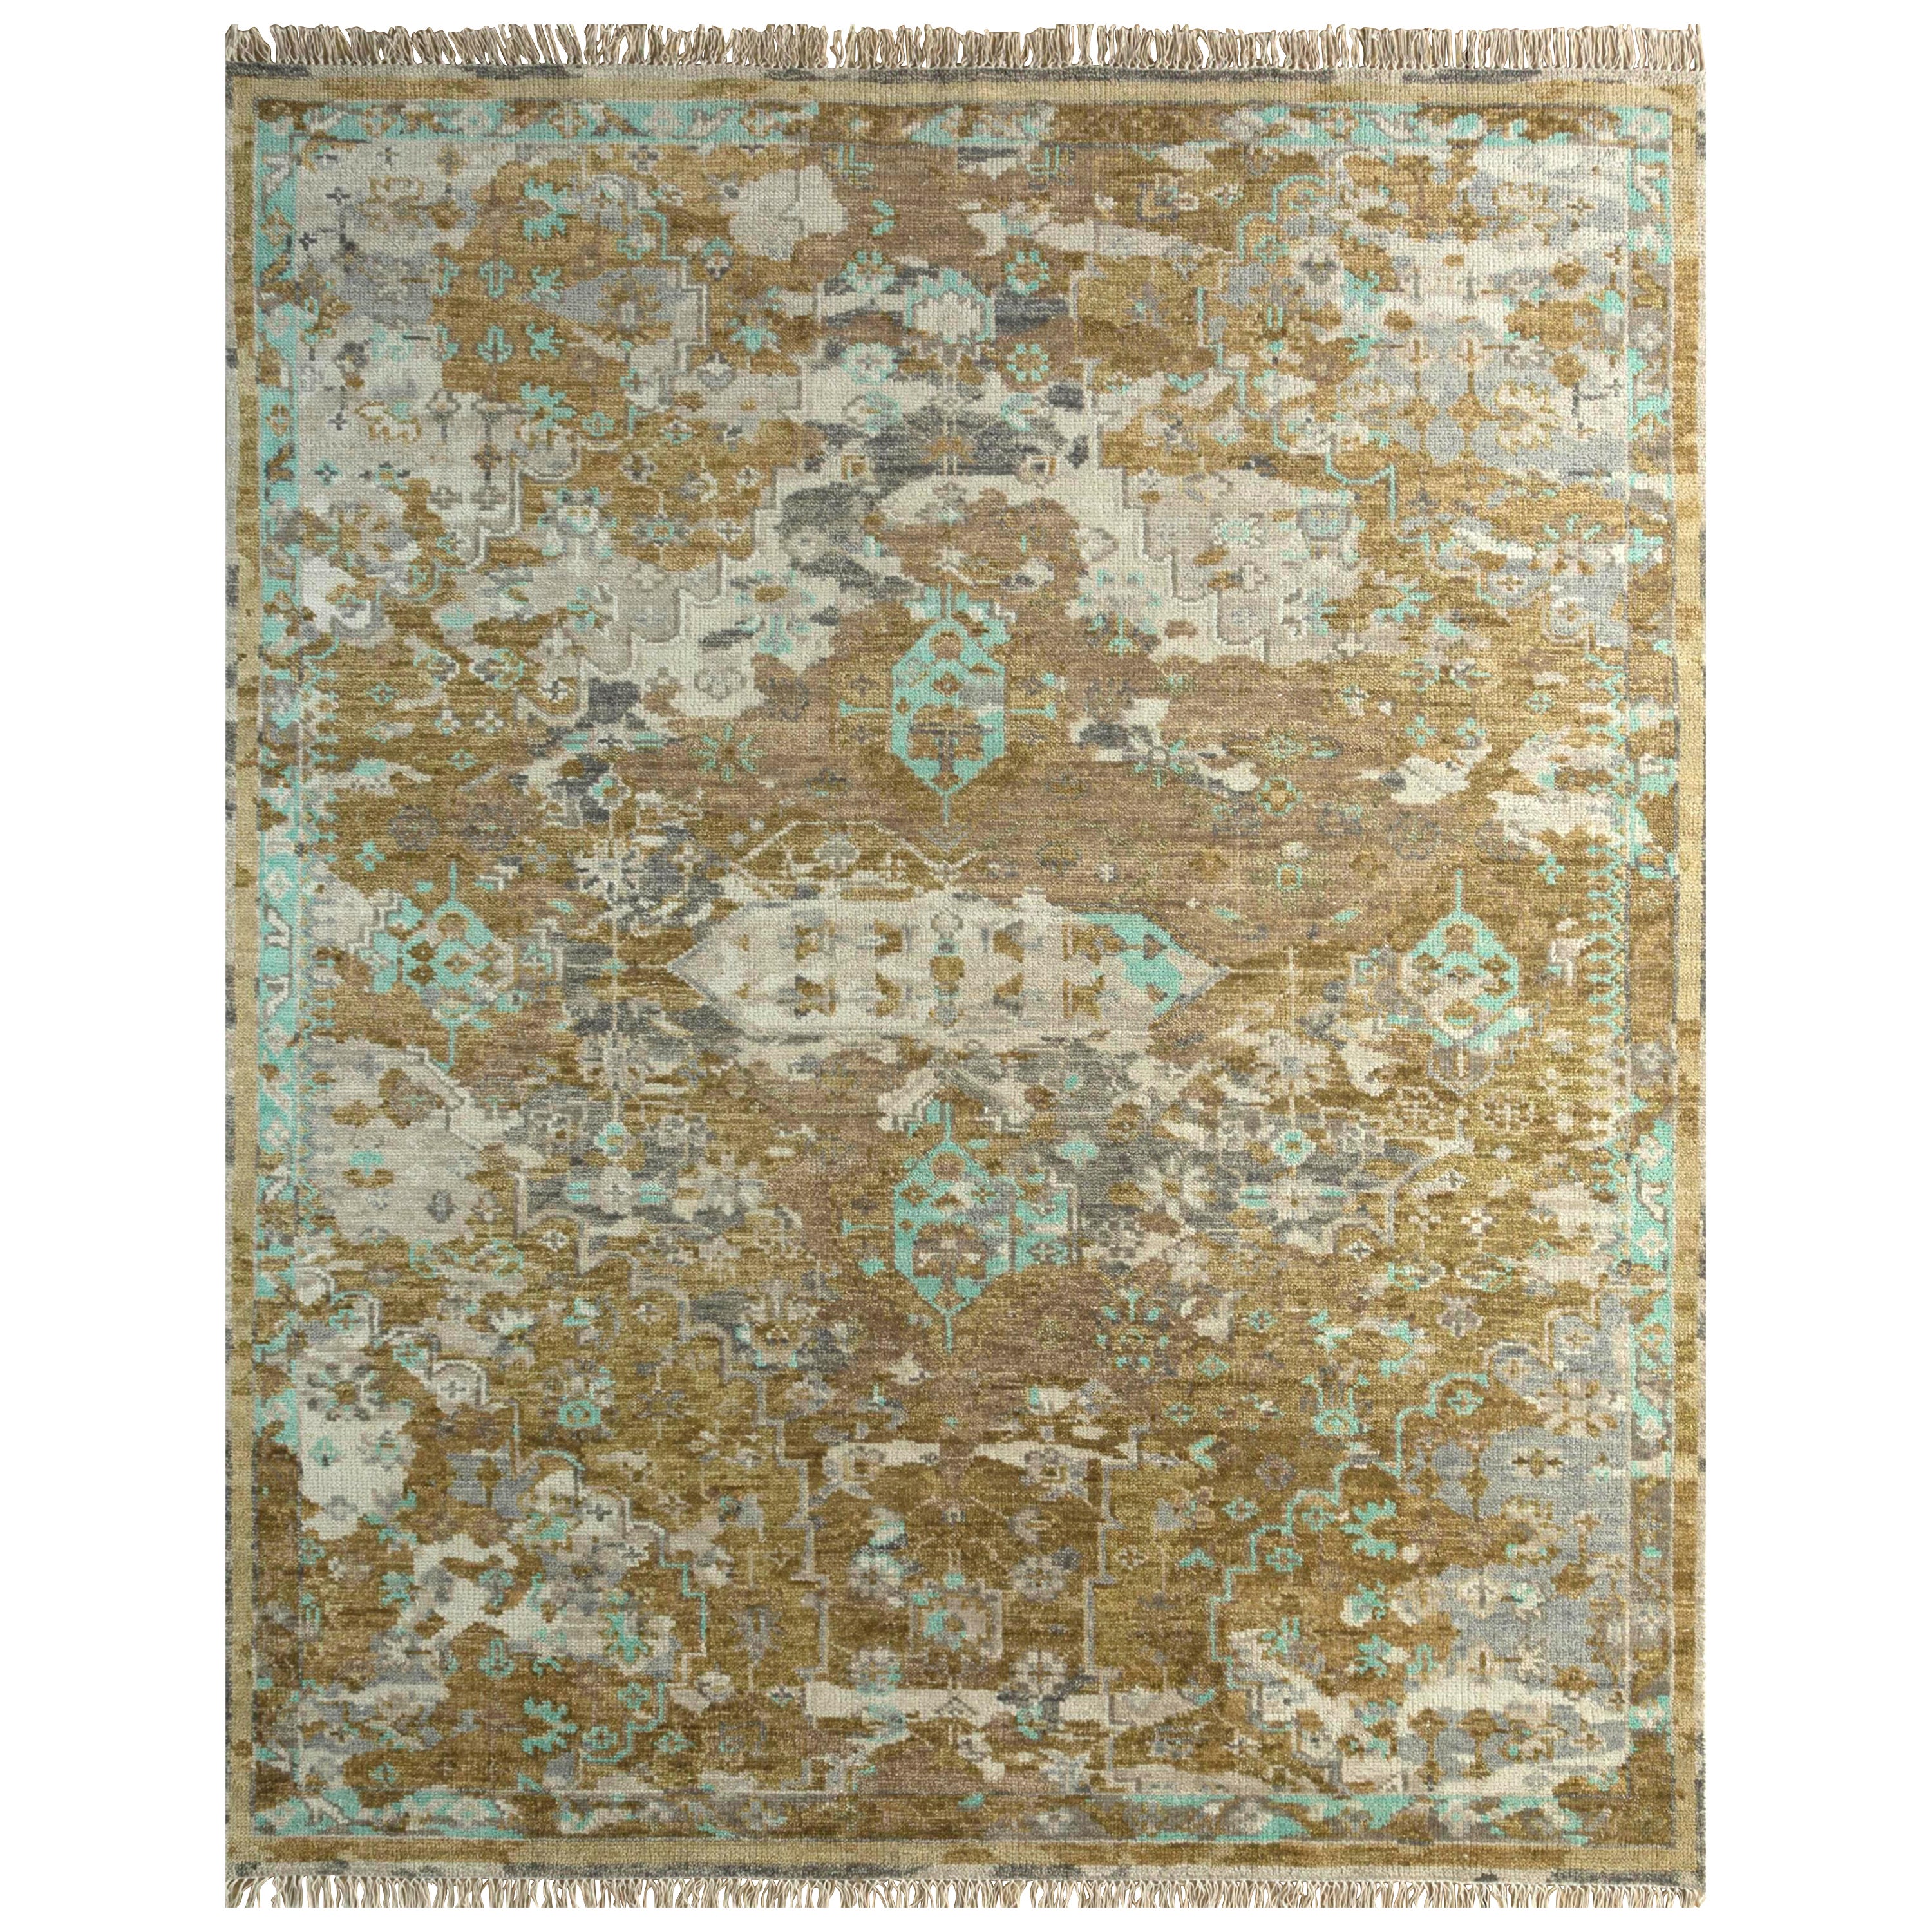 Duskfall Tapestry Dark Ivory & Spice Brown 240x300 cm Handknotted Rug For Sale